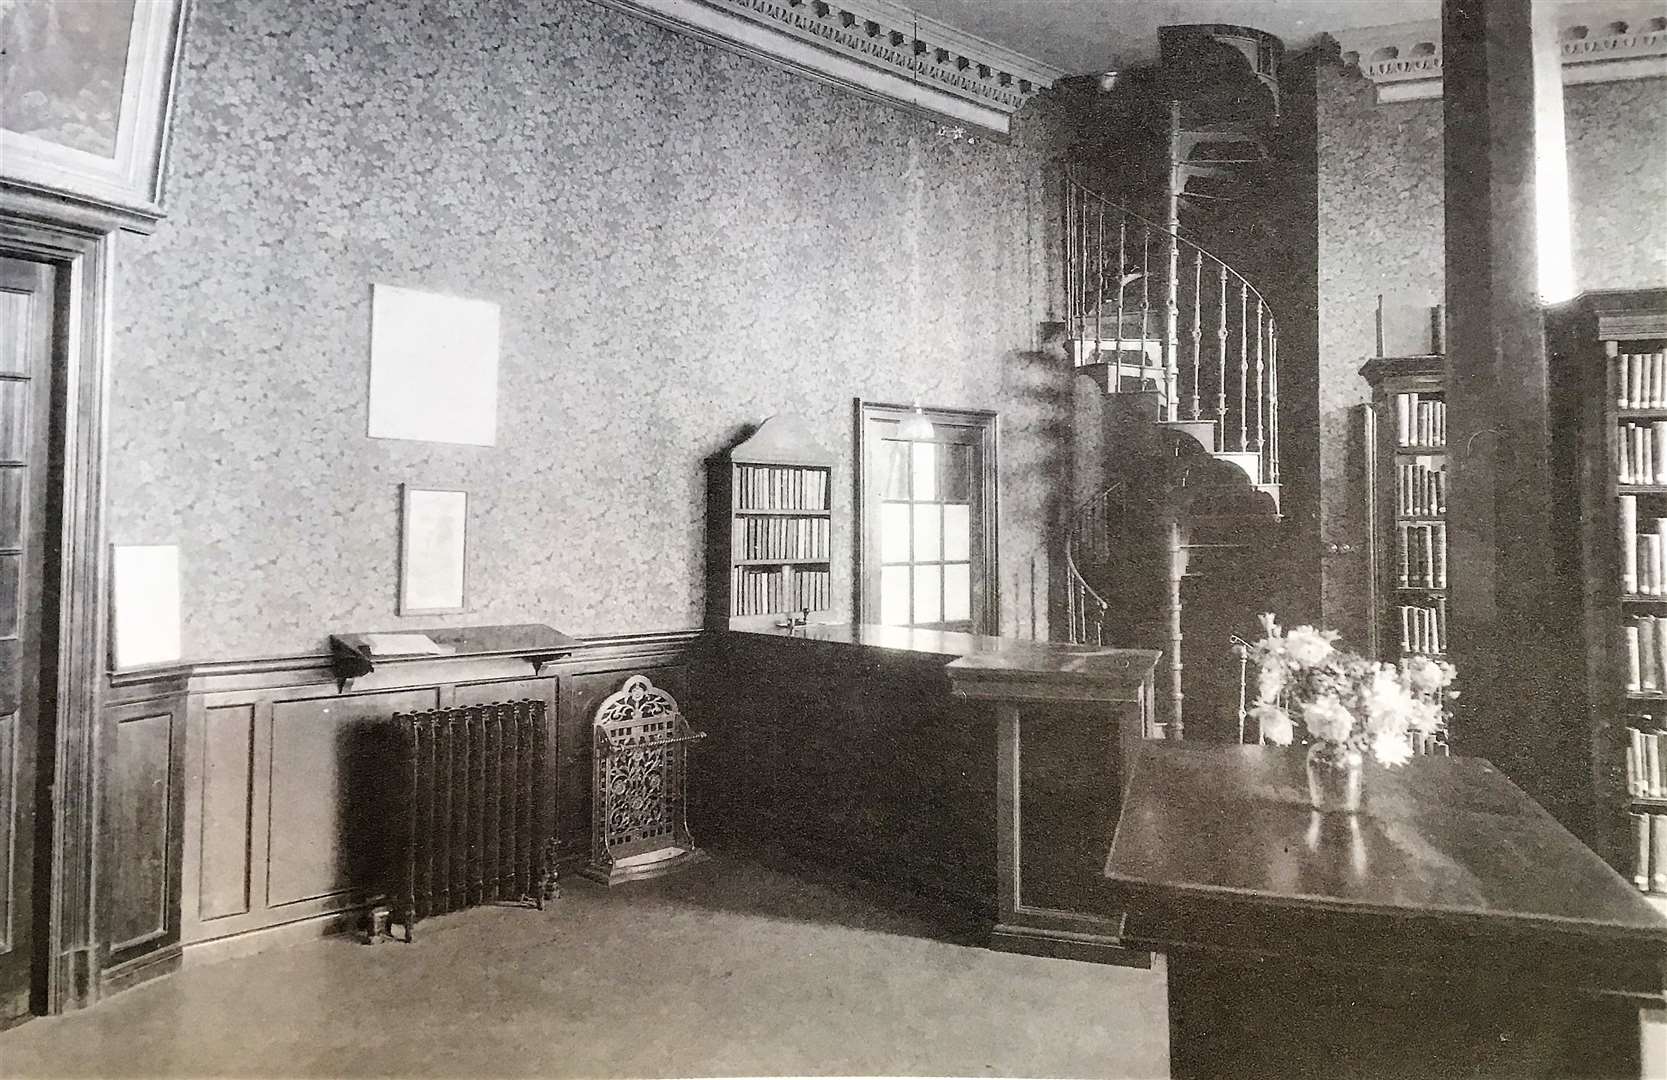 A picture of the Carnegie library in Wick from around 1910. The spiral staircase was removed around 1970 and led down to the basement where the statues were found.